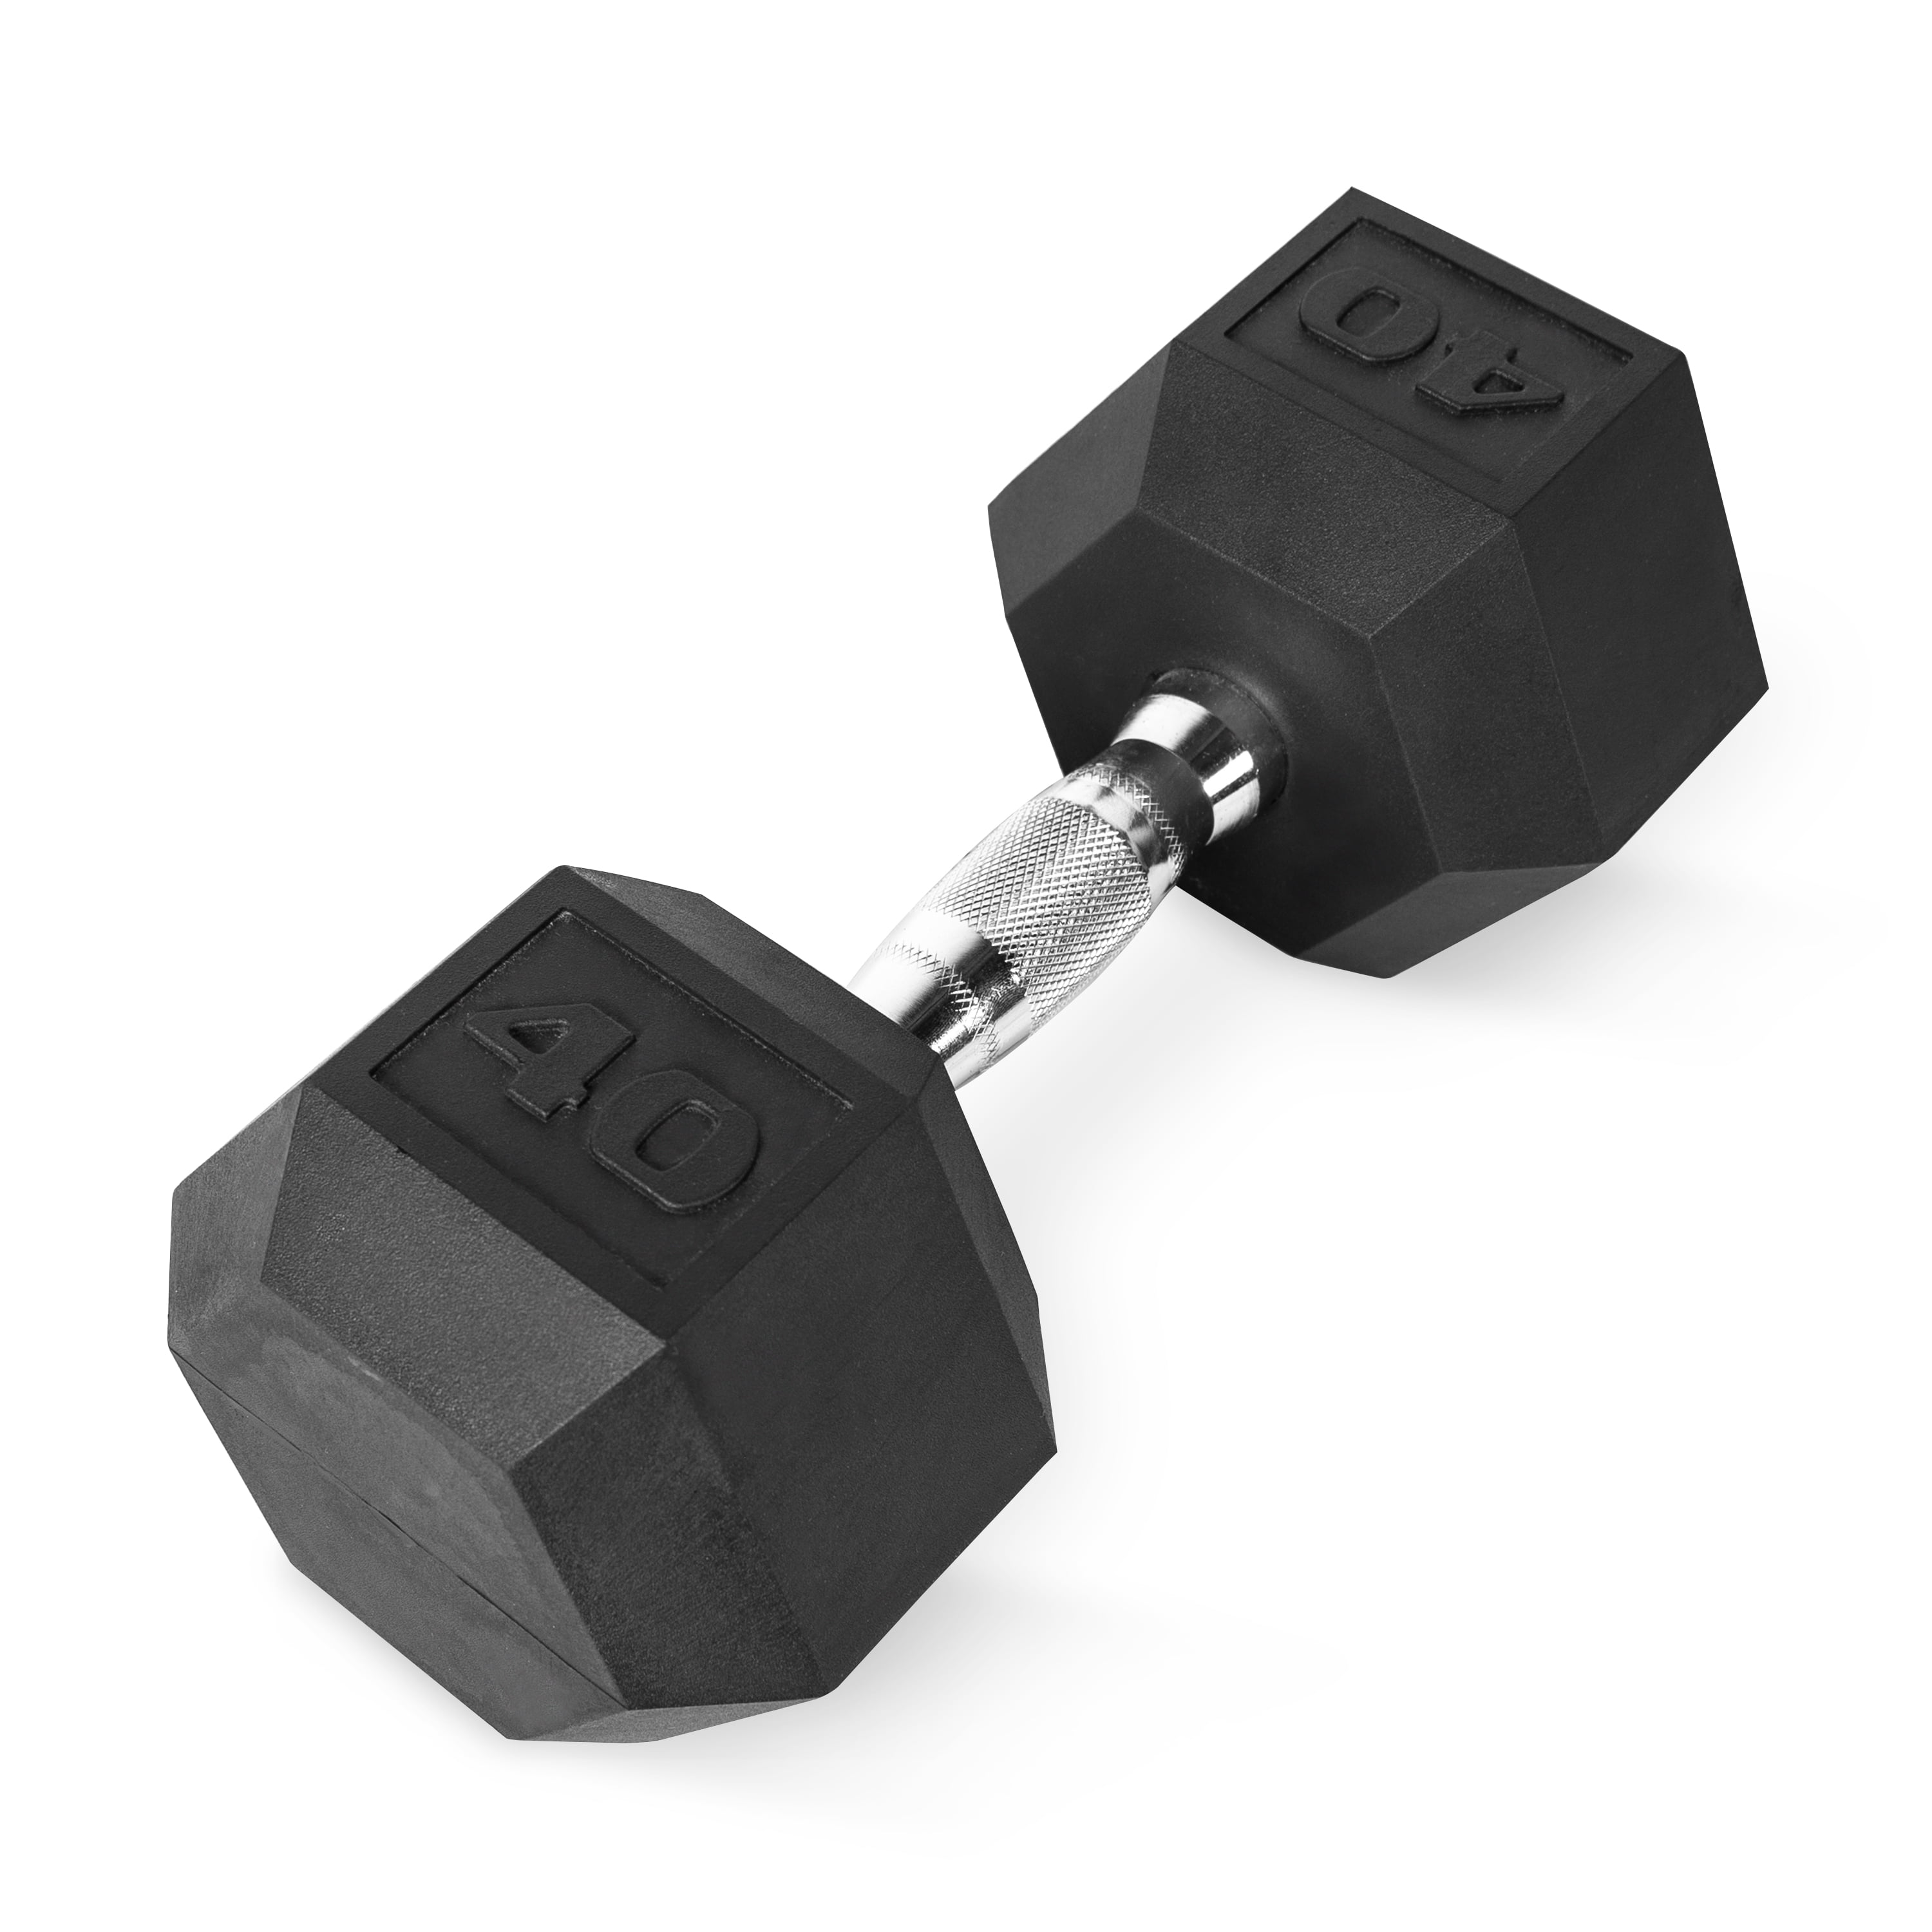 2 CAP Rubber Coated Hex 20 lbs Dumbbells Set Total 40 lbs NEW FREE SHIPPING 